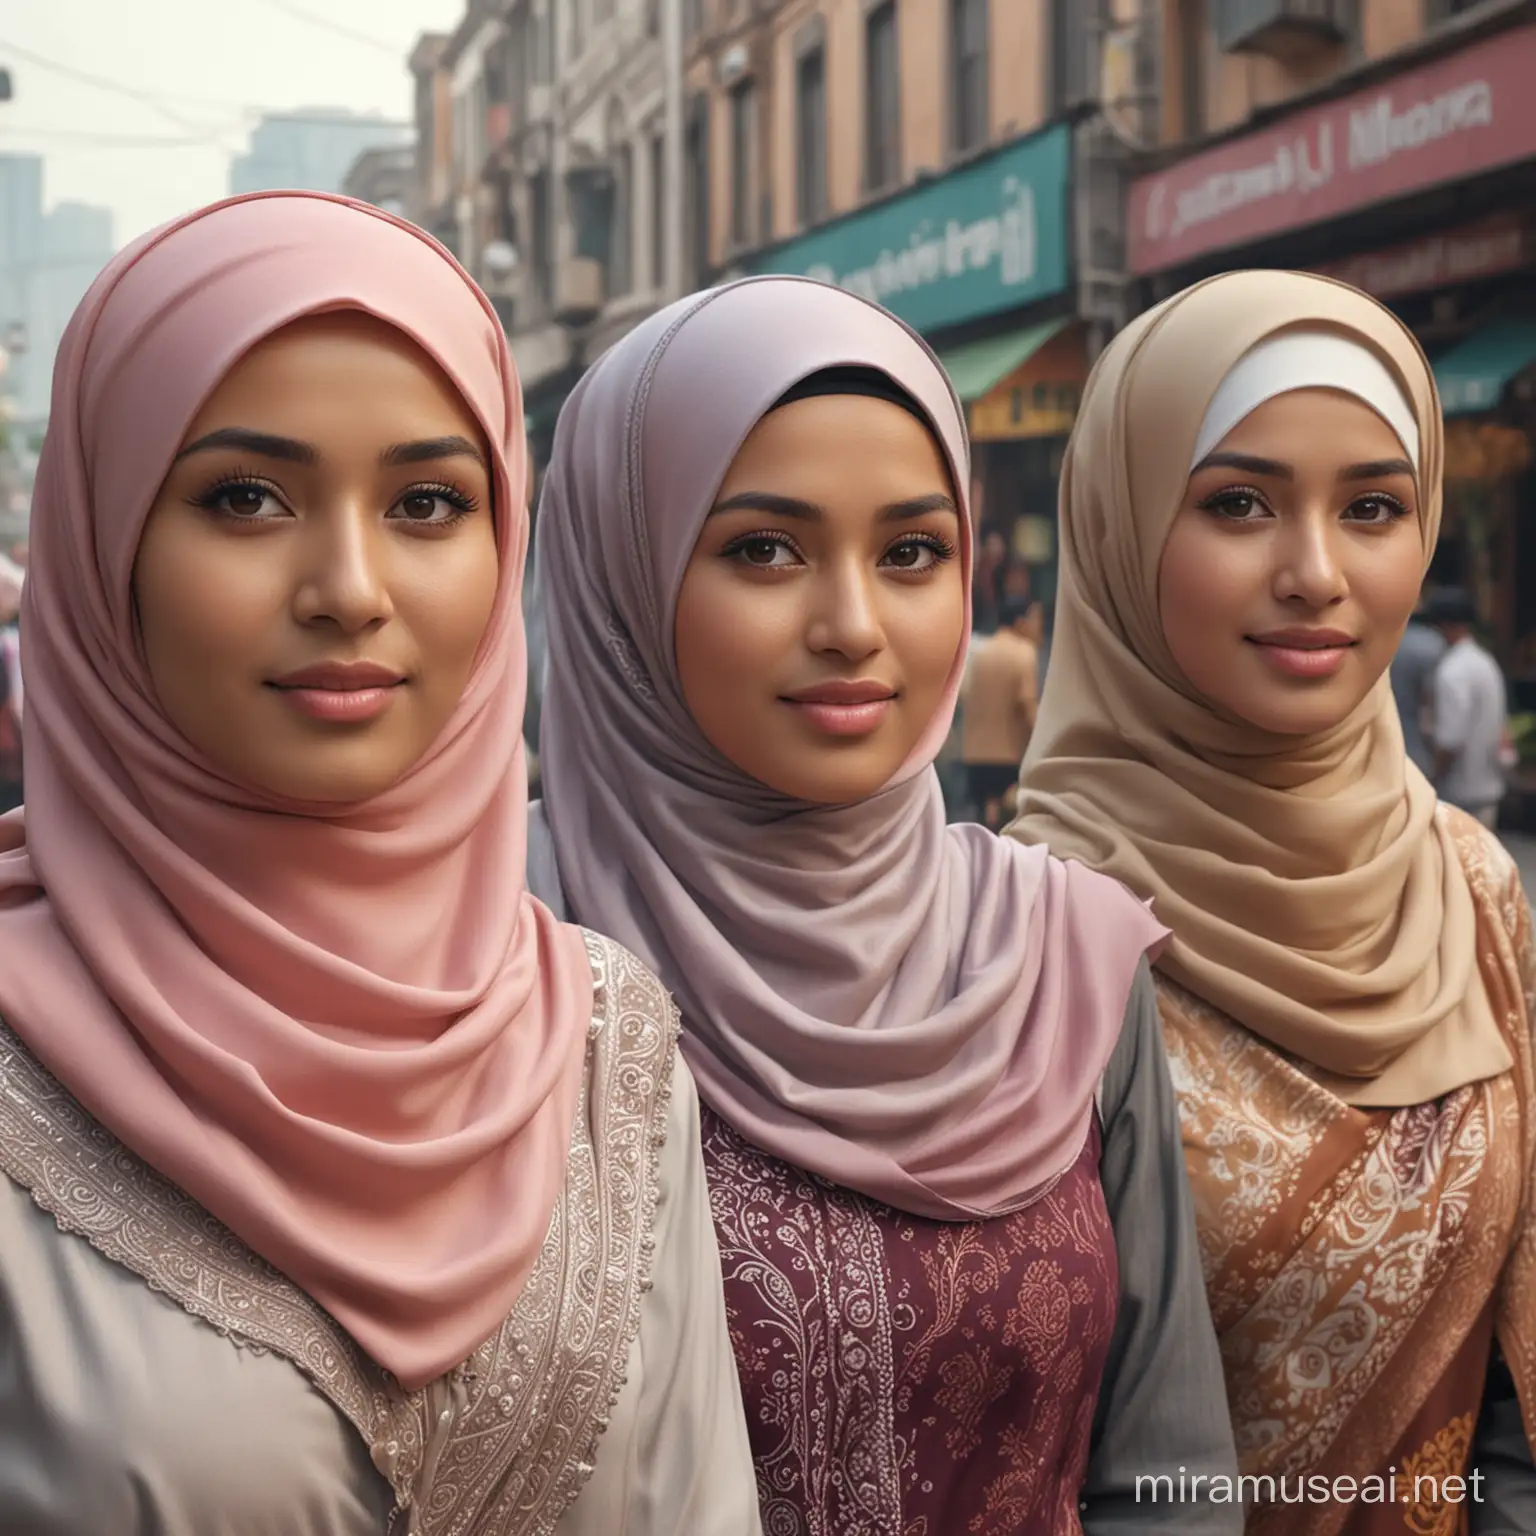 three indonesia women wearing hijabs are standing on the street, focus camera,photorealistic,UHD, 8K, crowd background in the indonesia market